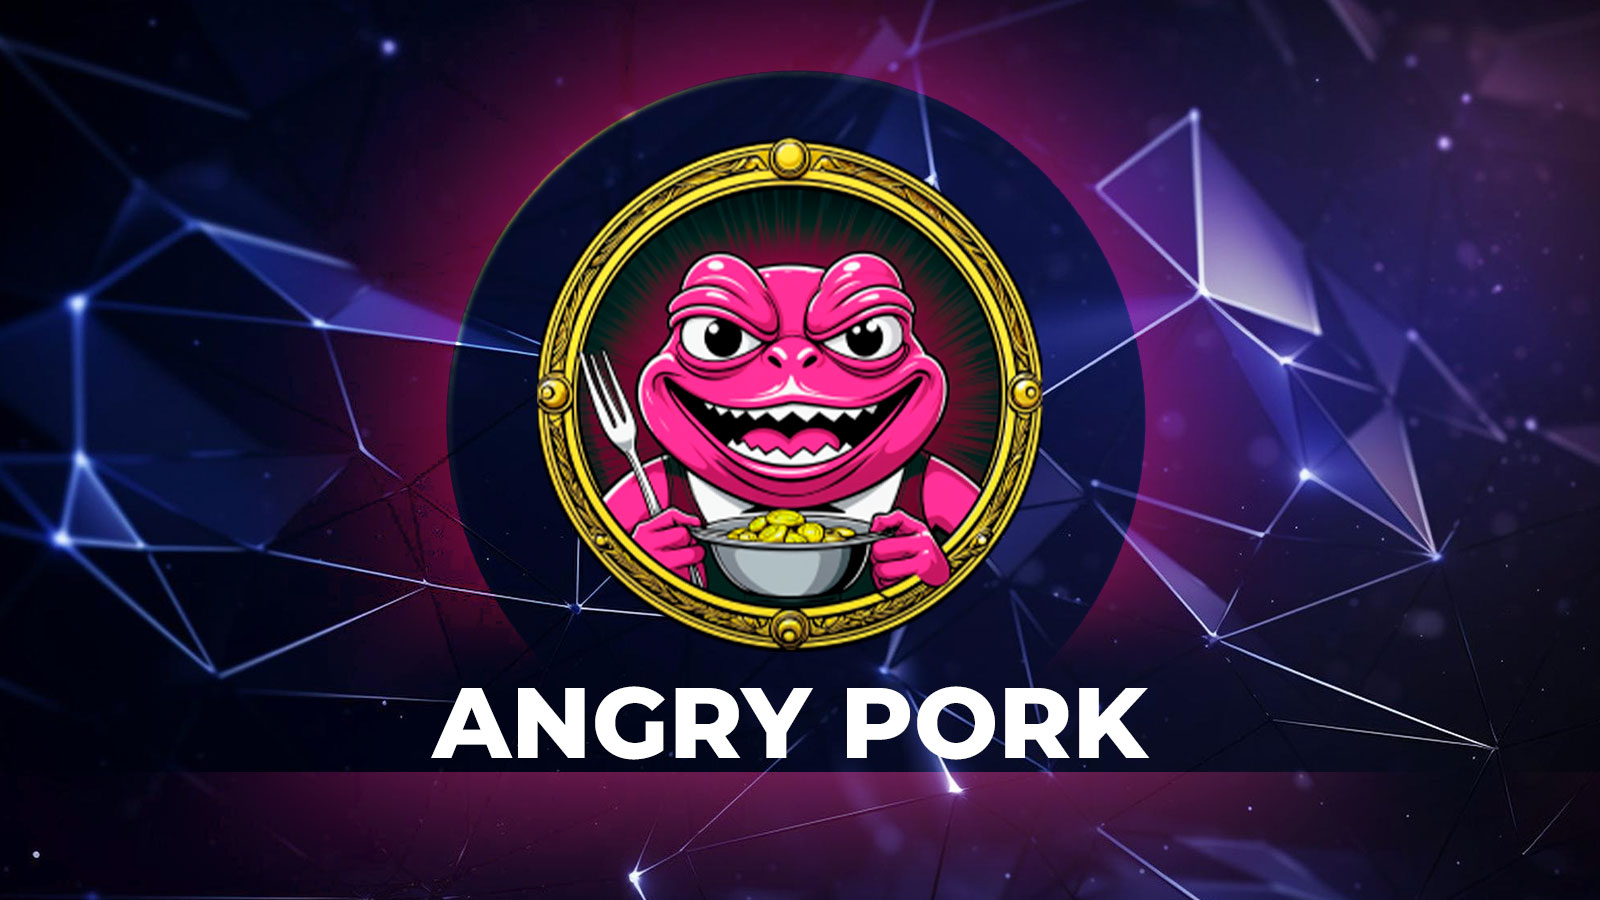 Angry Pepe Fork (APORK) Asset Pre-Sale Might be Gaining Attention in June as Floki (FLOKI) and Dogecoin (DOGE) Large Meme Coins Target New Goals